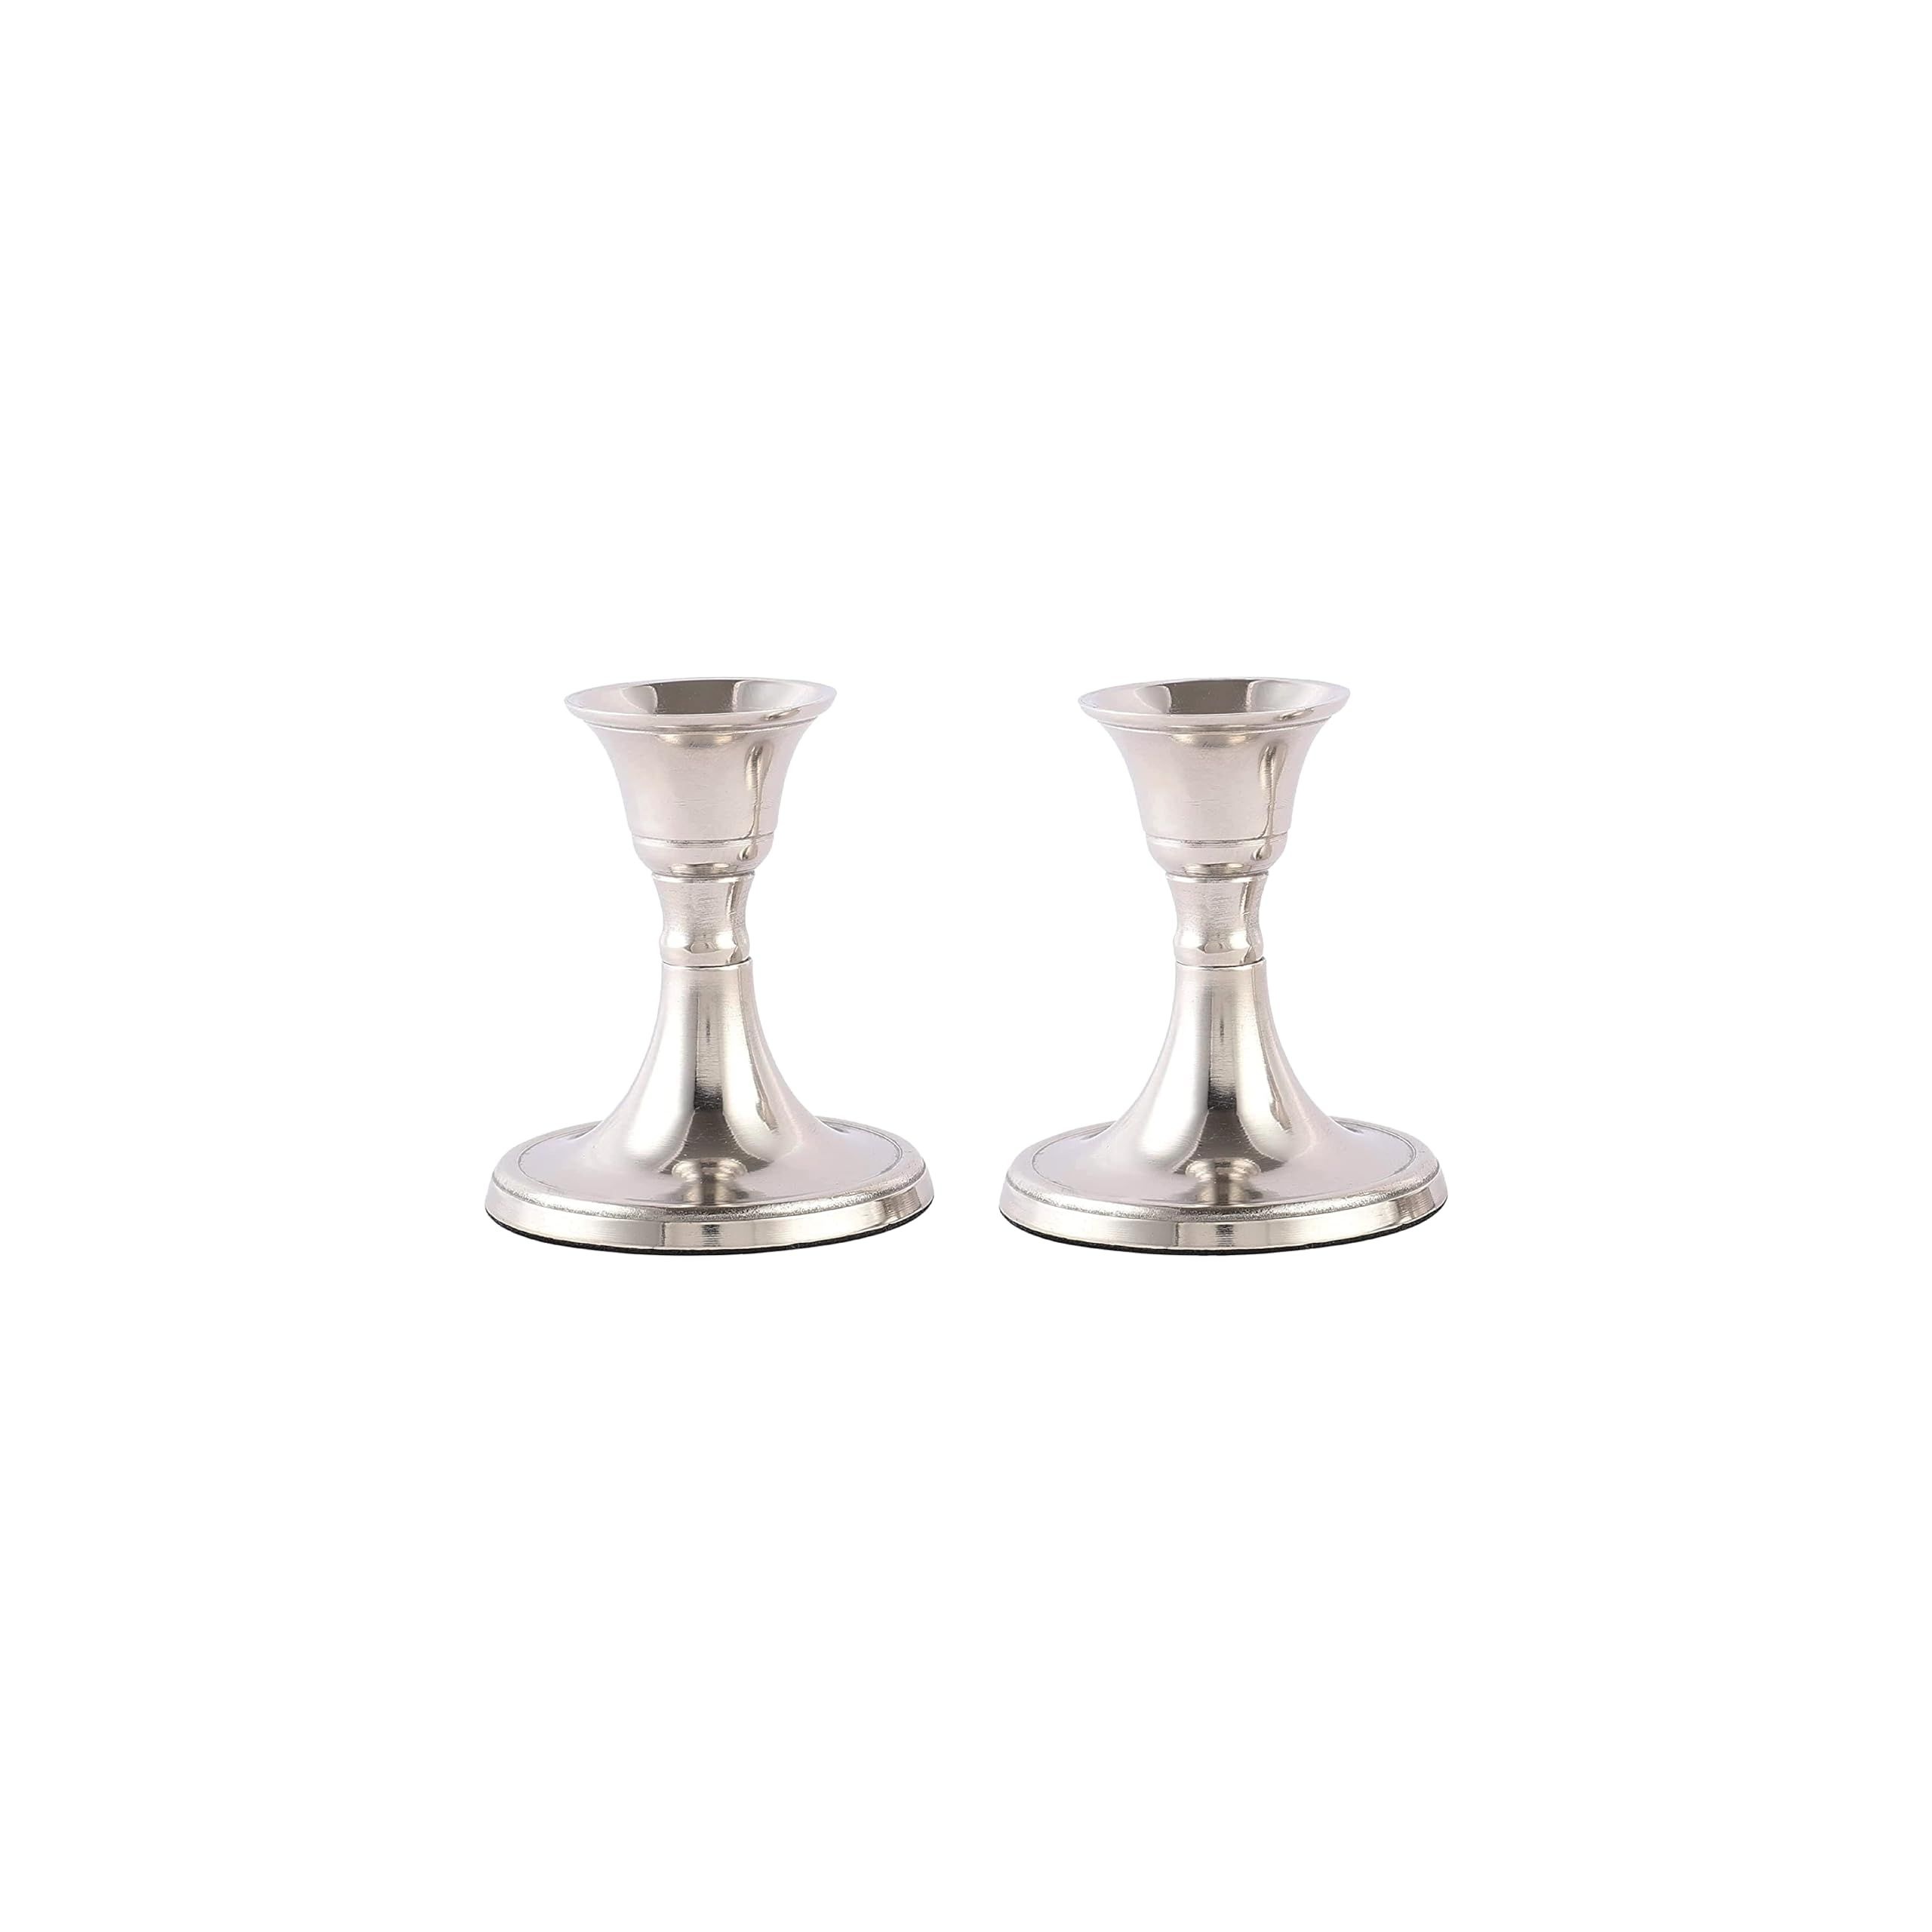 Rely+ Silver Candle Holder Set of 2 - Decorative Taper Candles for Candlesticks - Candle Stick Ca... | Amazon (US)